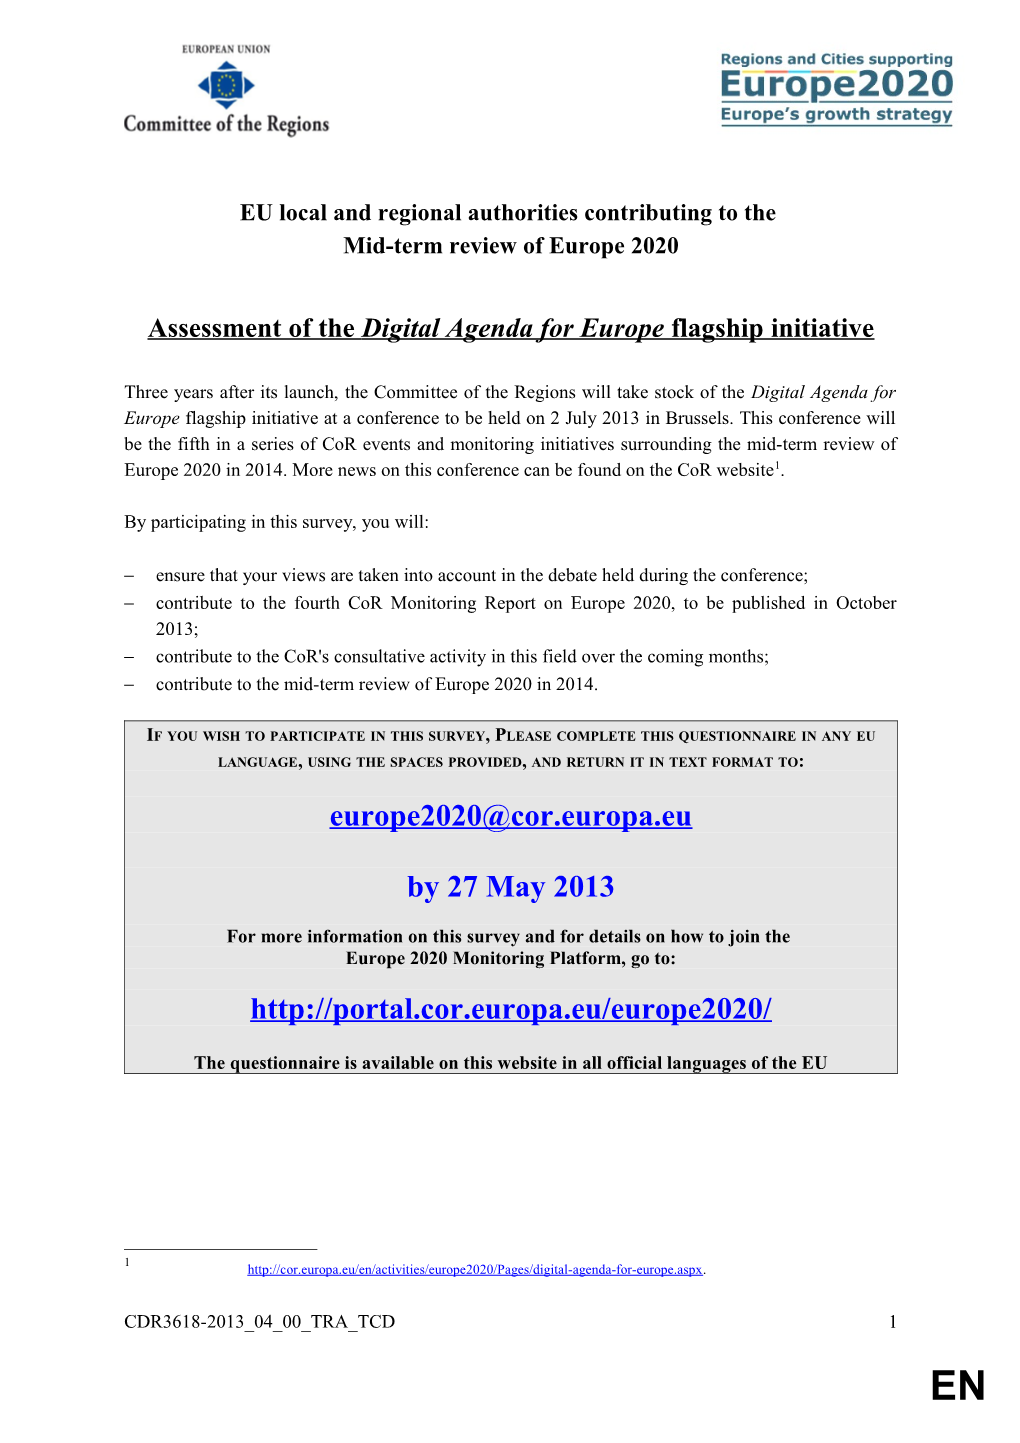 Digital Agenda for Europe Survey, Answers from Regional Government of Extremadura